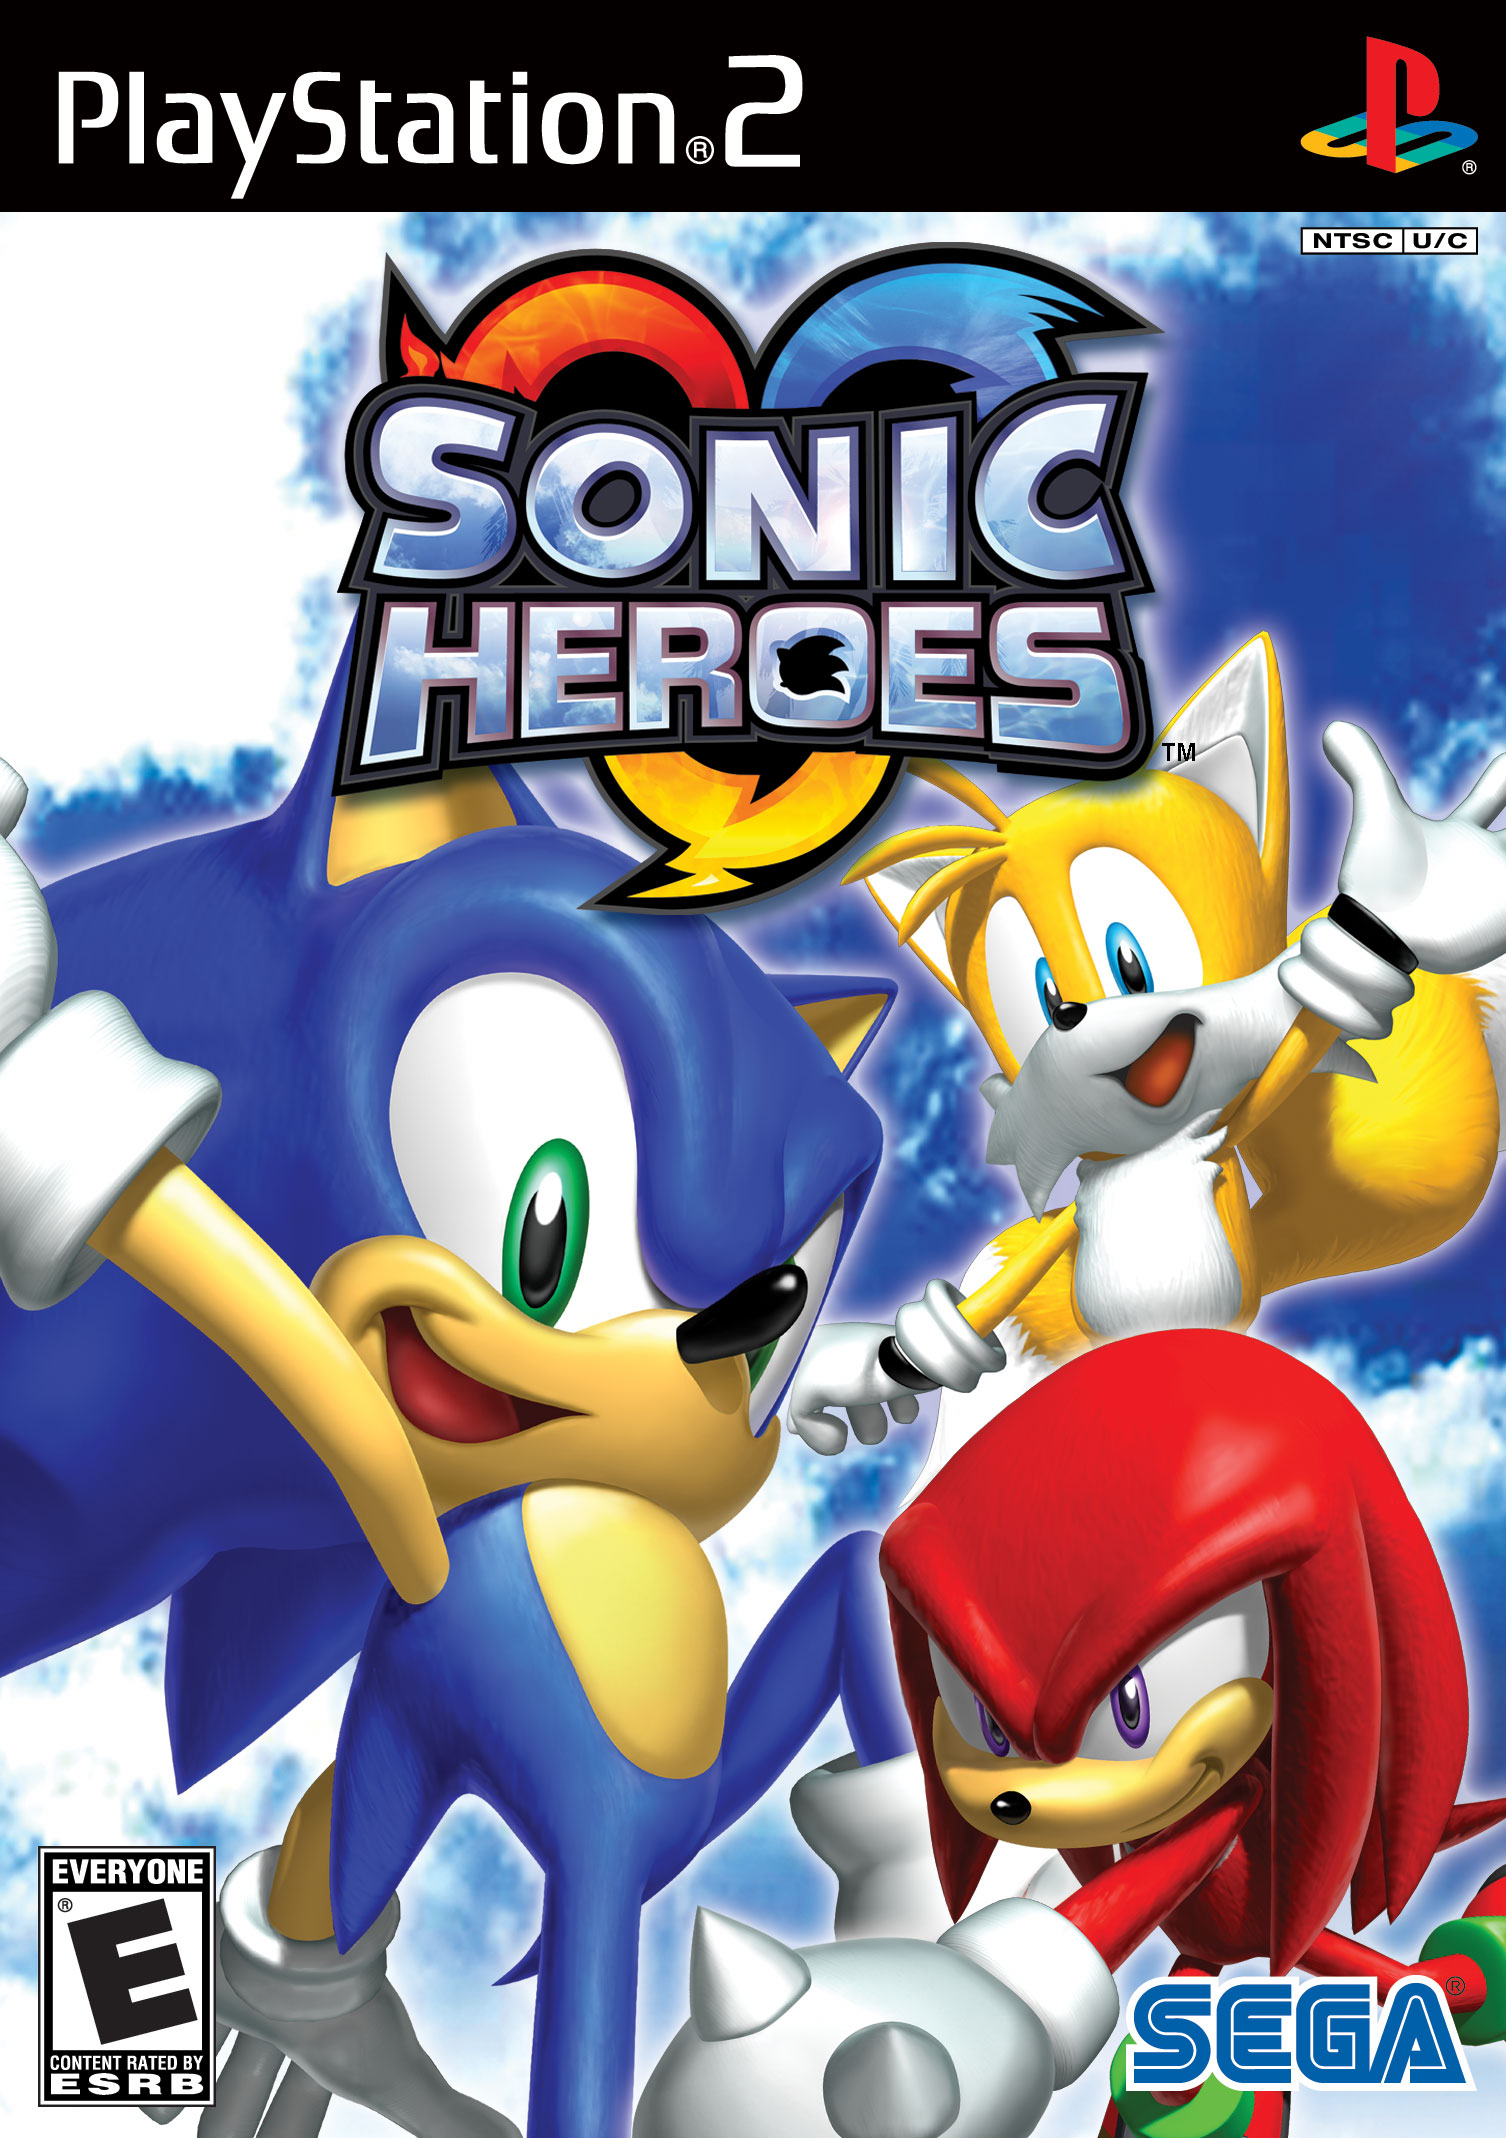 Is Sonic Heroes A Good Game